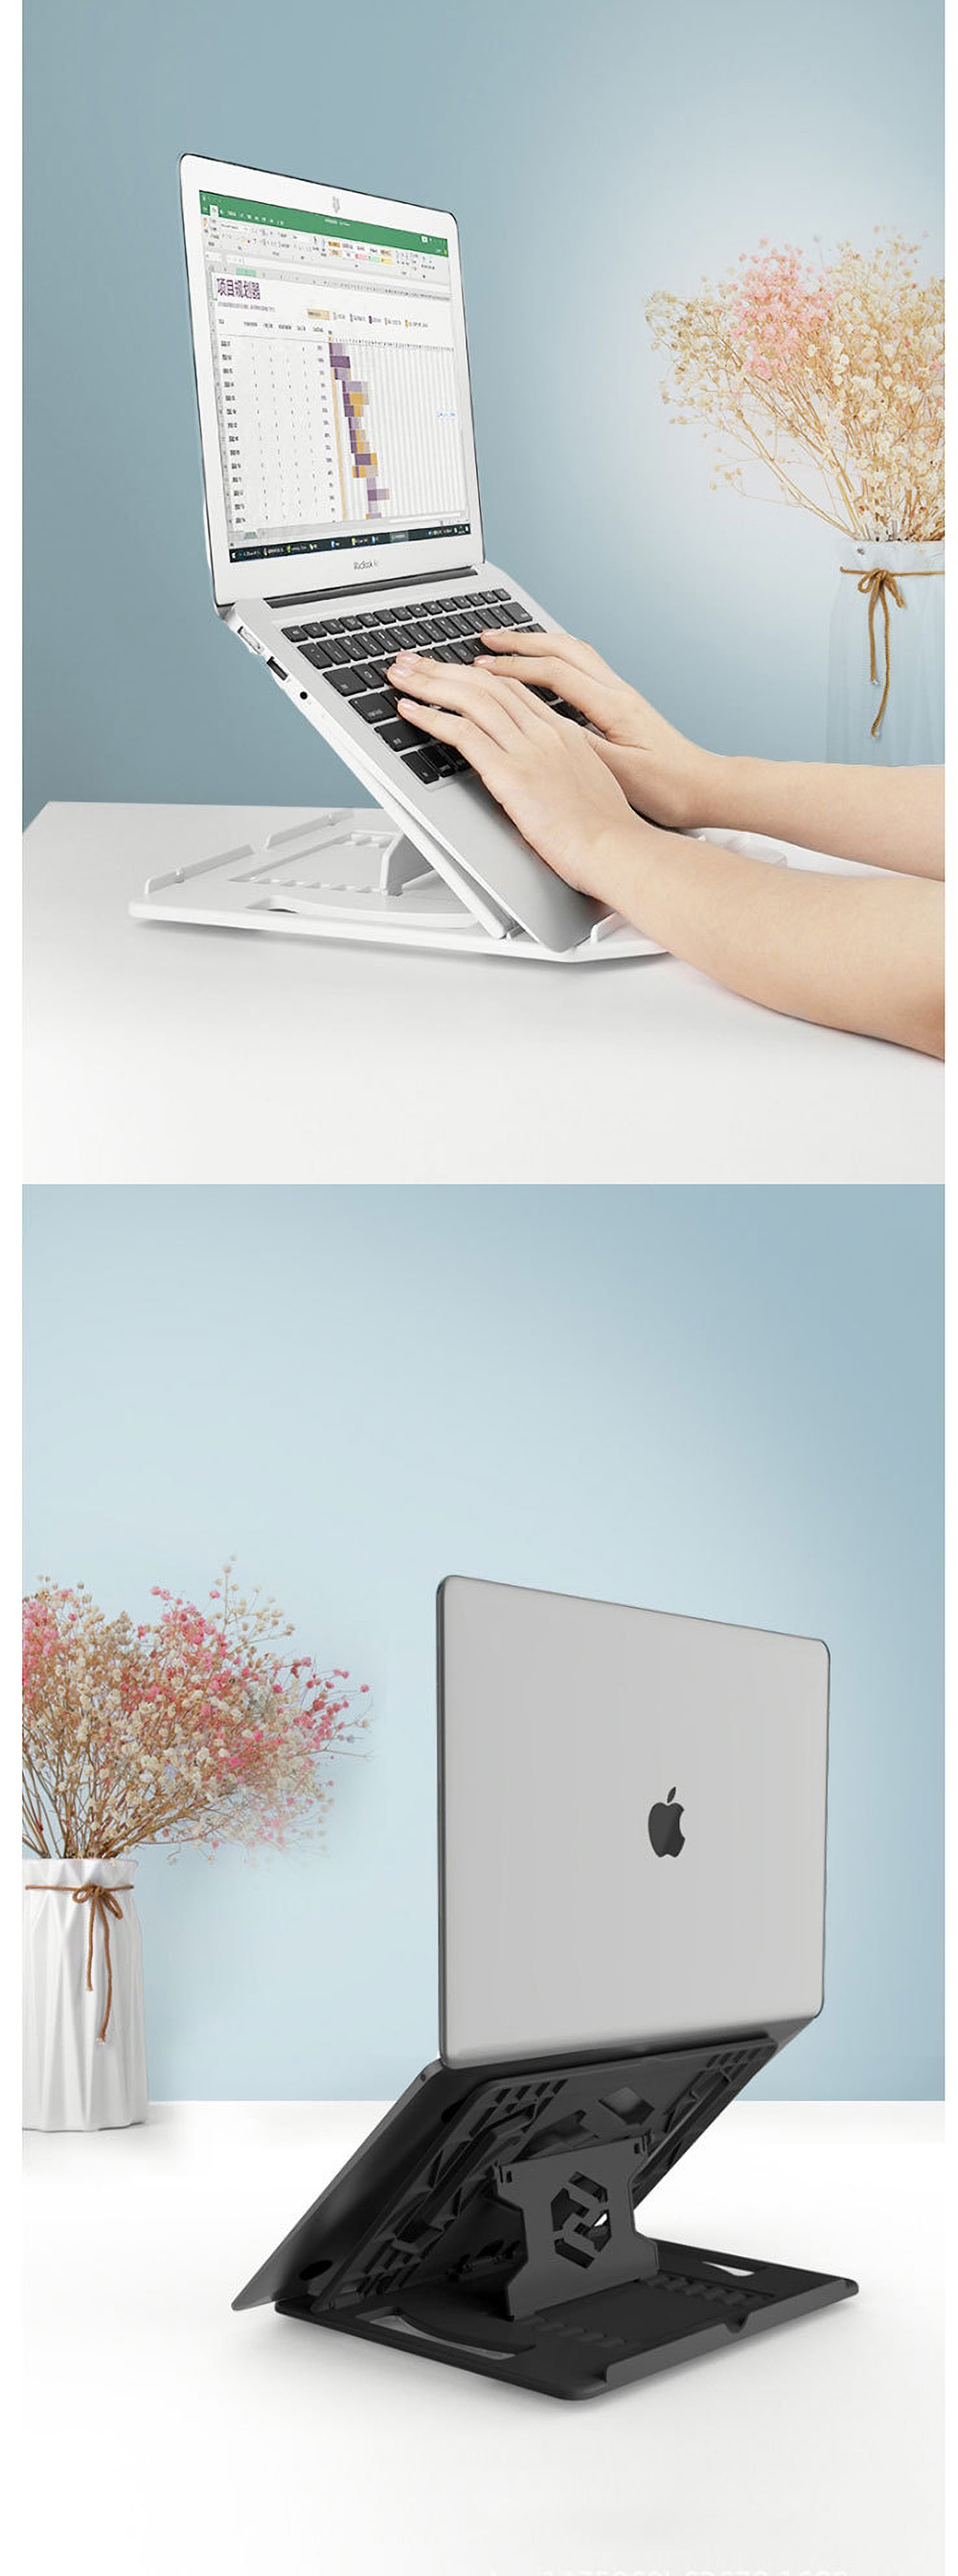 360deg-Rotatable-Laptop-Stand-Notebook-Bracket-Cooling-Pad-Chassis-Lifting-Bracket-Base-Suohuang-SH--1763718-7